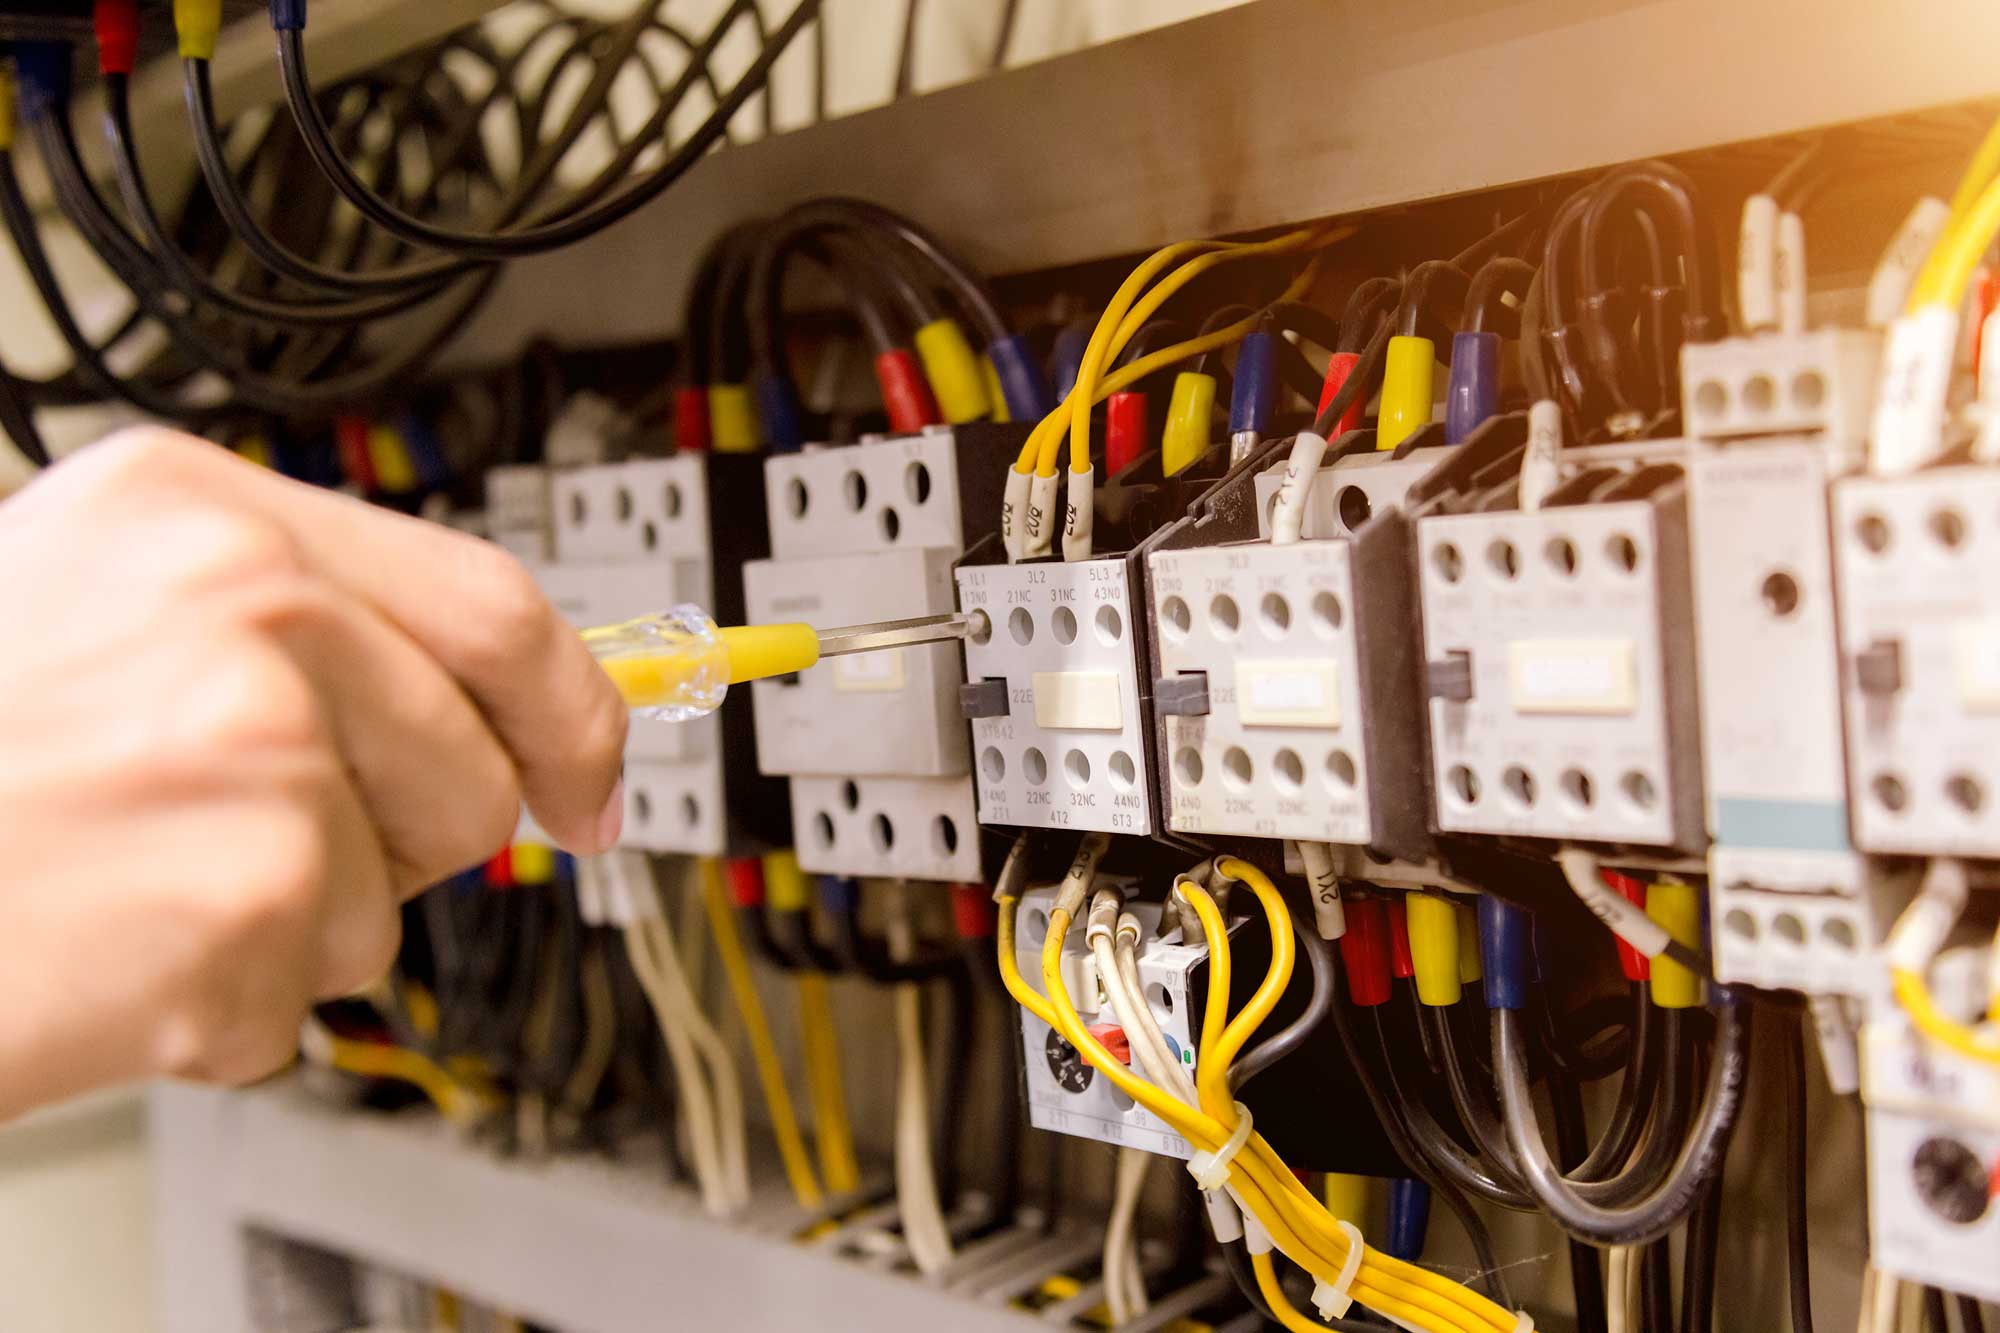 DMV Electrical Service handles all types of electrical works